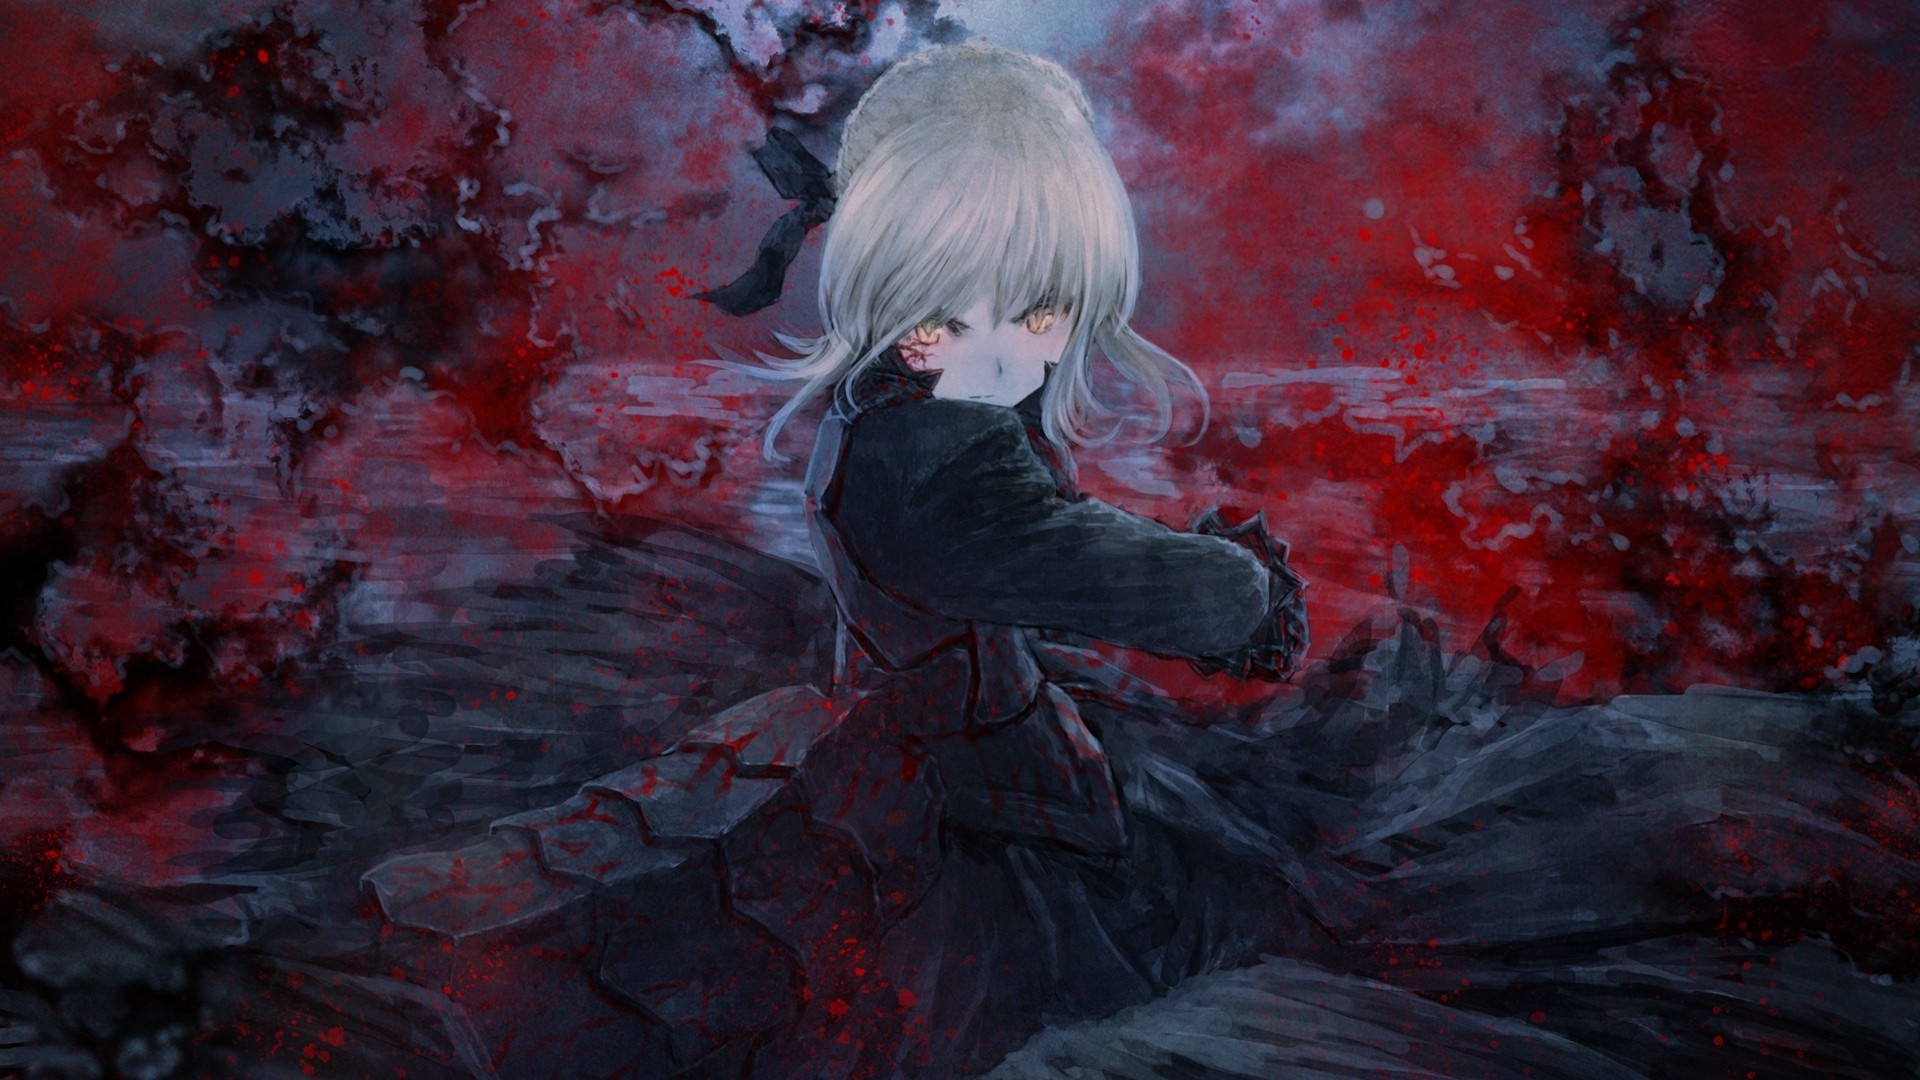 Wallpaper painting anime girls red sky fate series saber alter type moon art girl darkness screenshot x px puter wallpaper goth subculture watercolor paint phenomenon visual arts cg artwork x